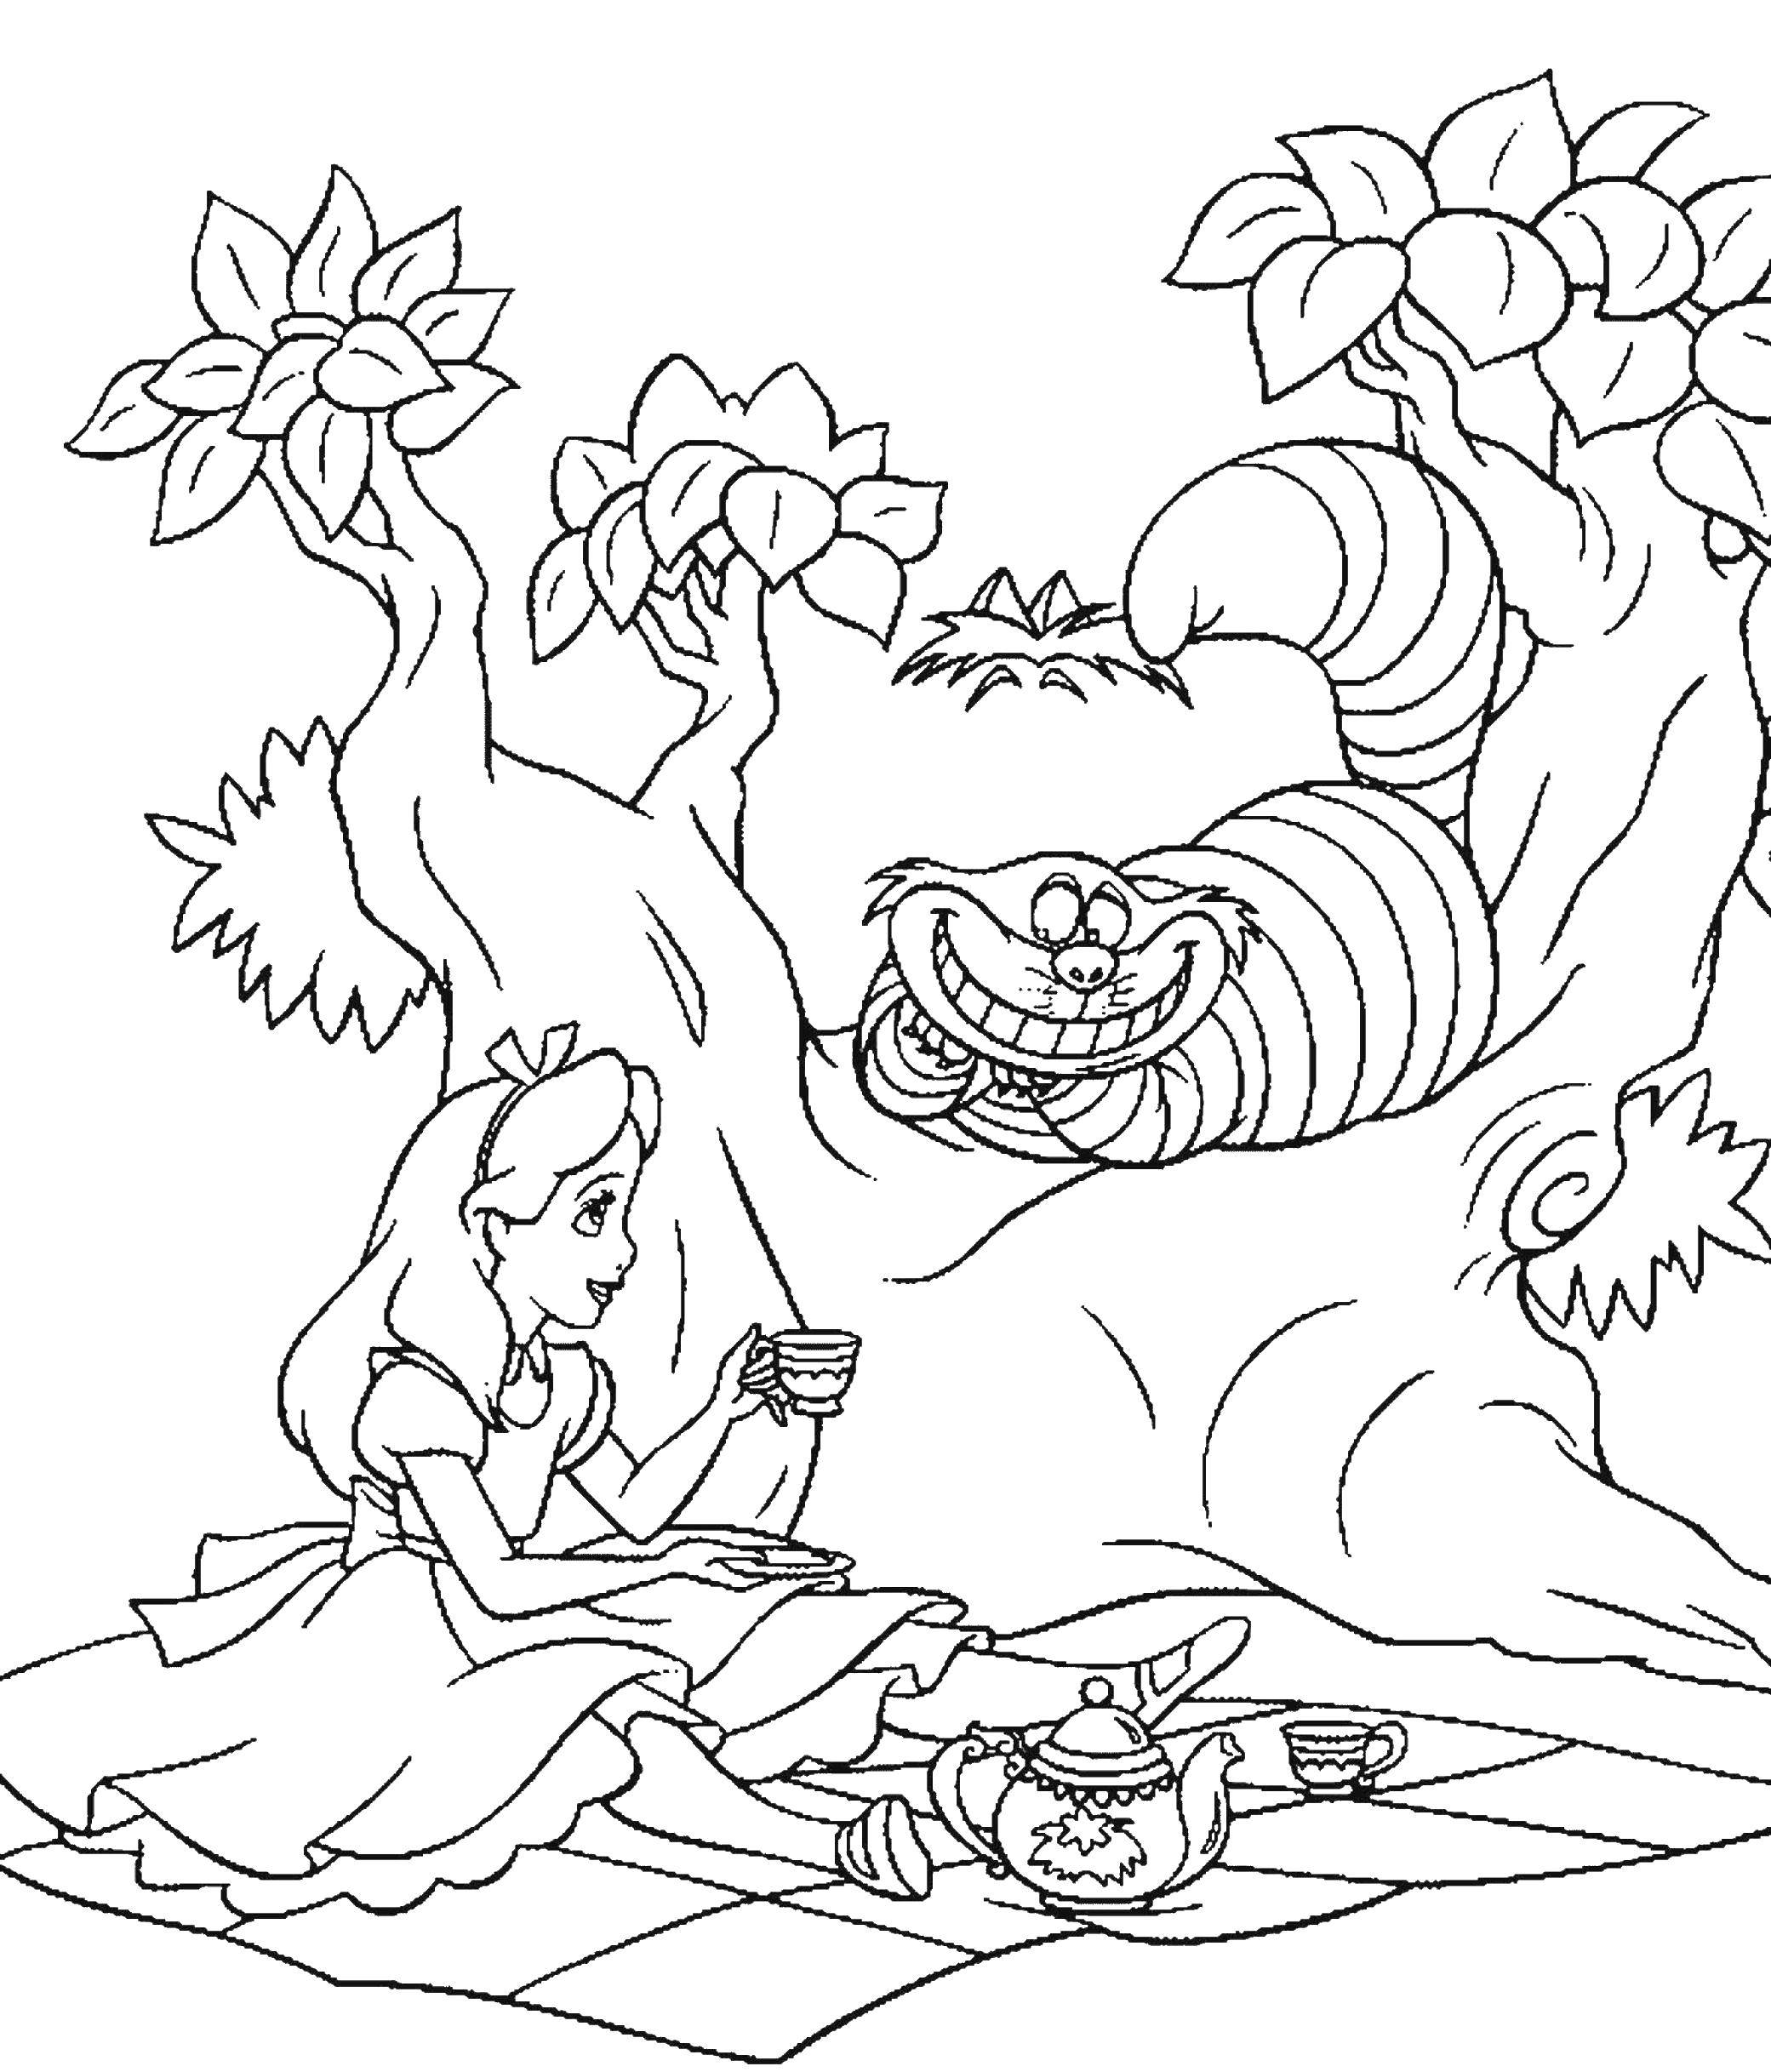 Coloring Alice is on a picnic with the Cheshire cat. Category coloring. Tags:  Alice, cat.